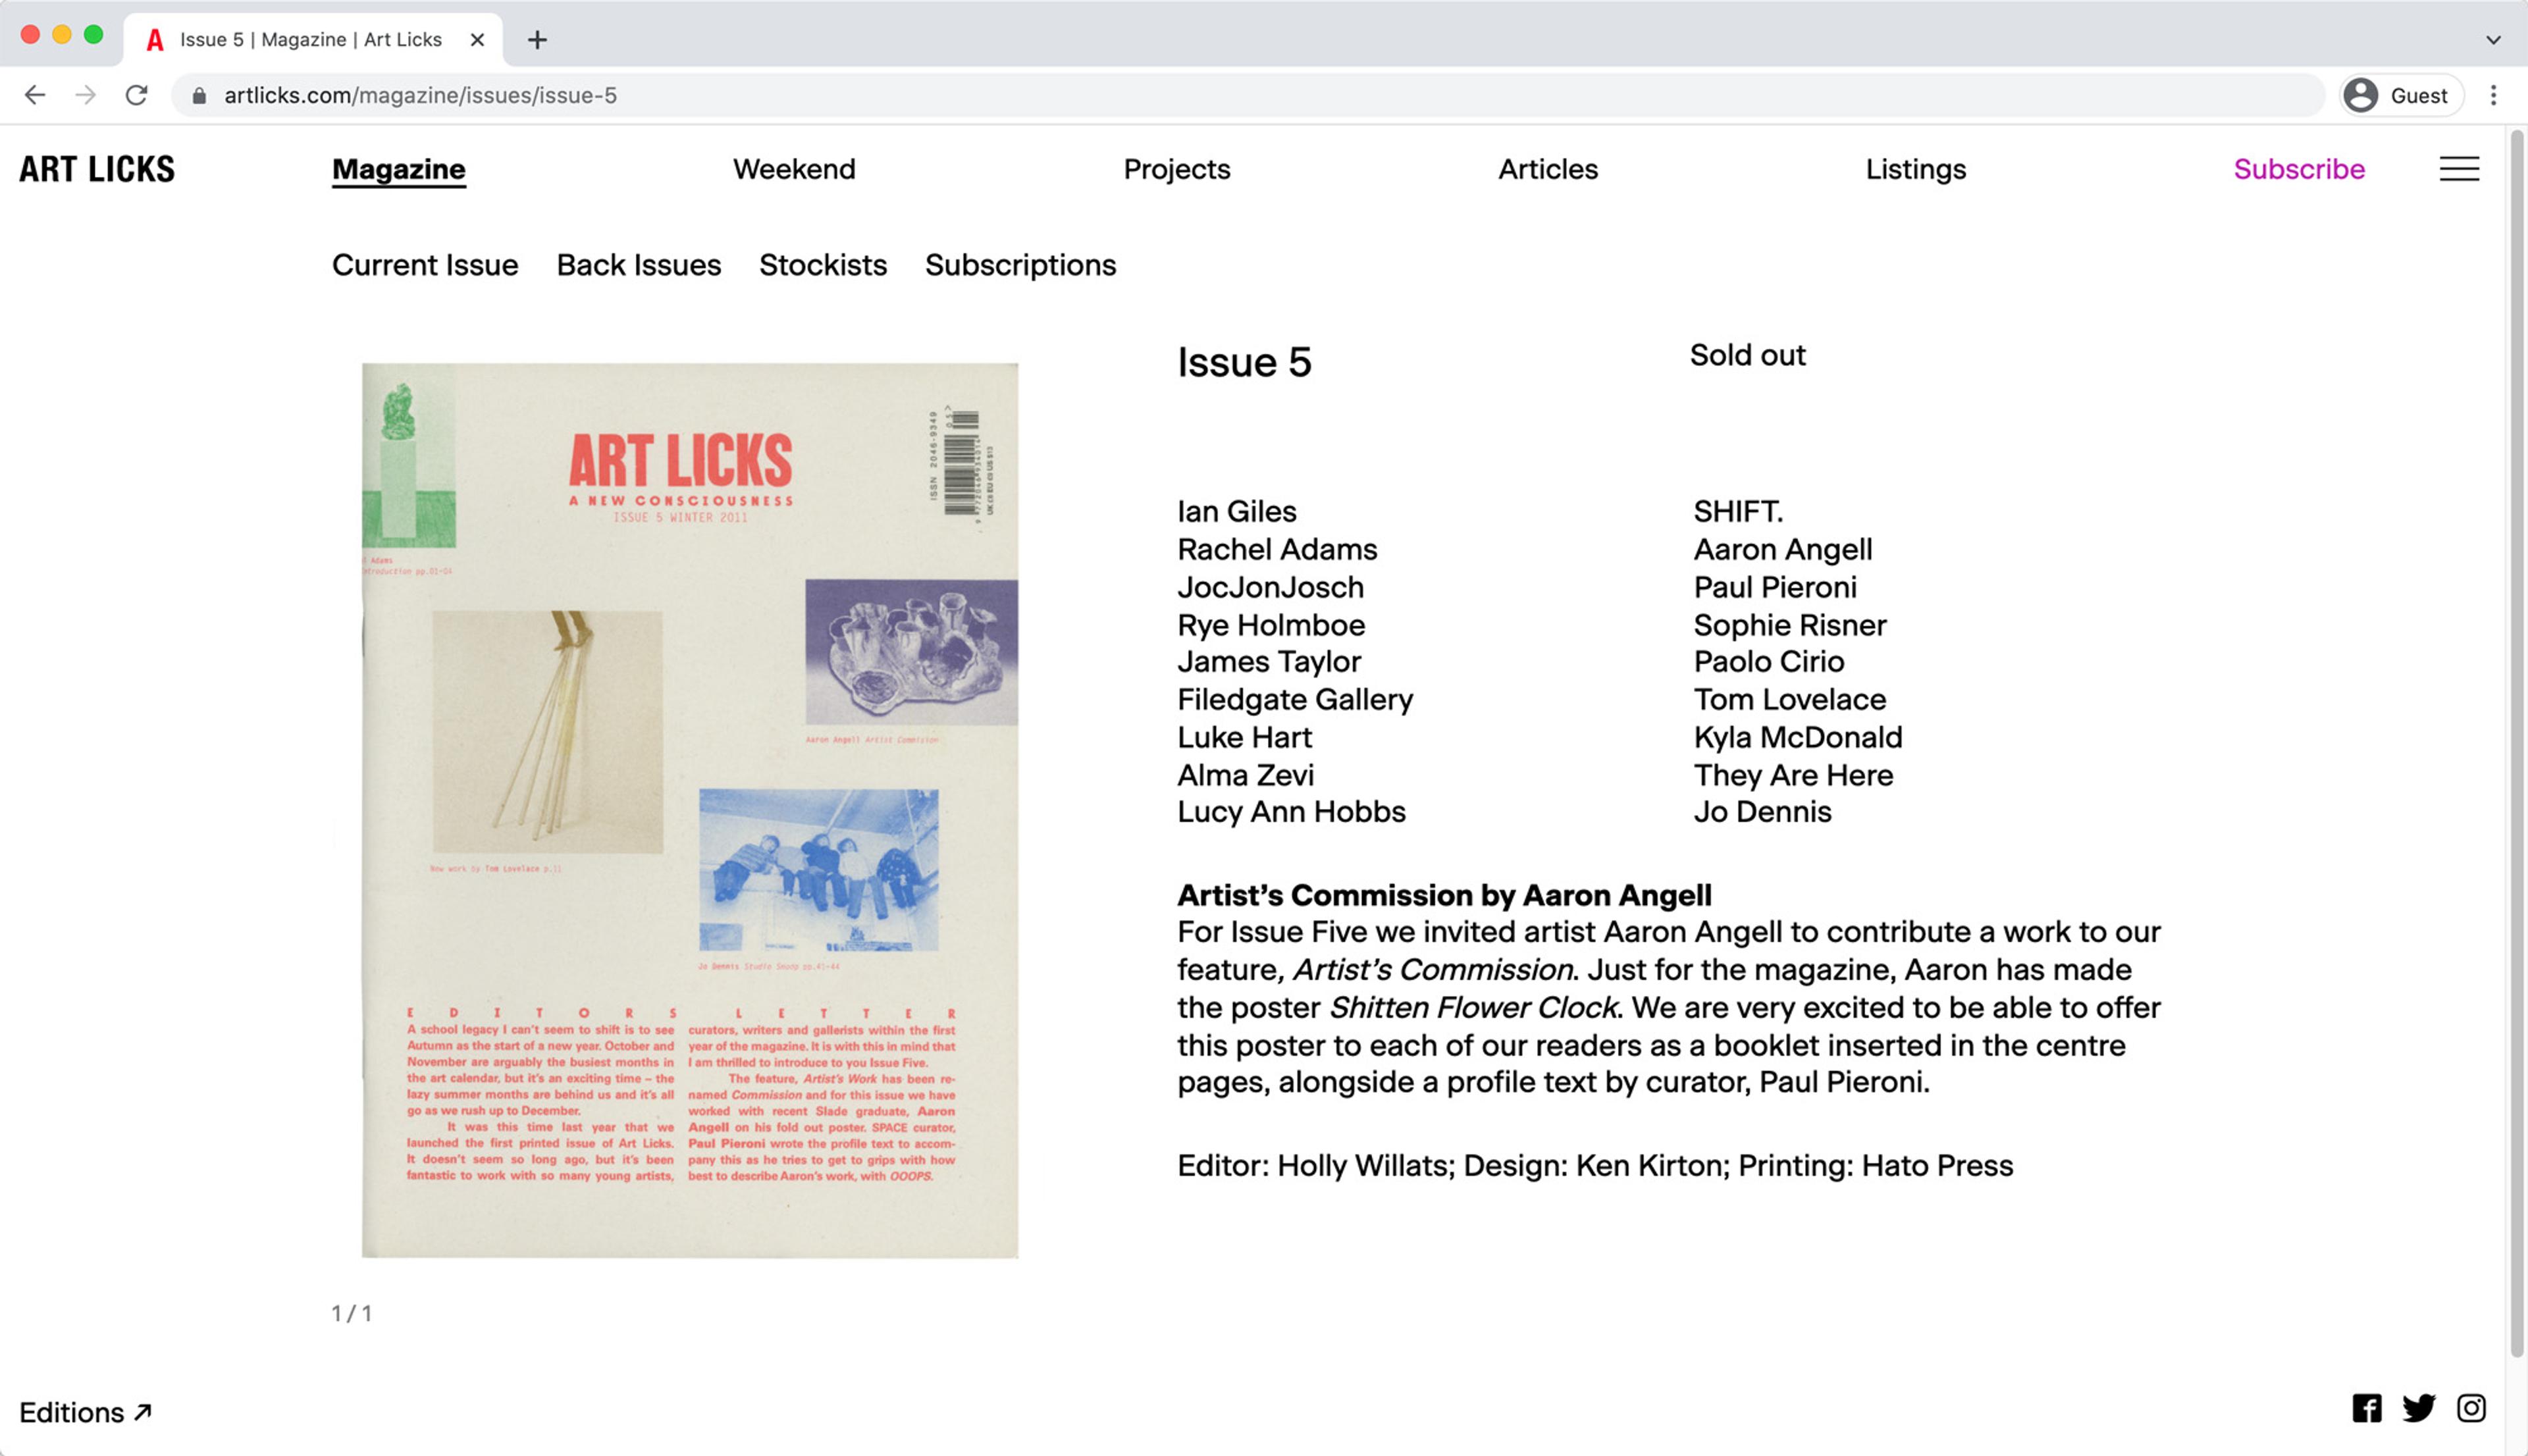 A back issue page on Art Licks, including a list of contributors